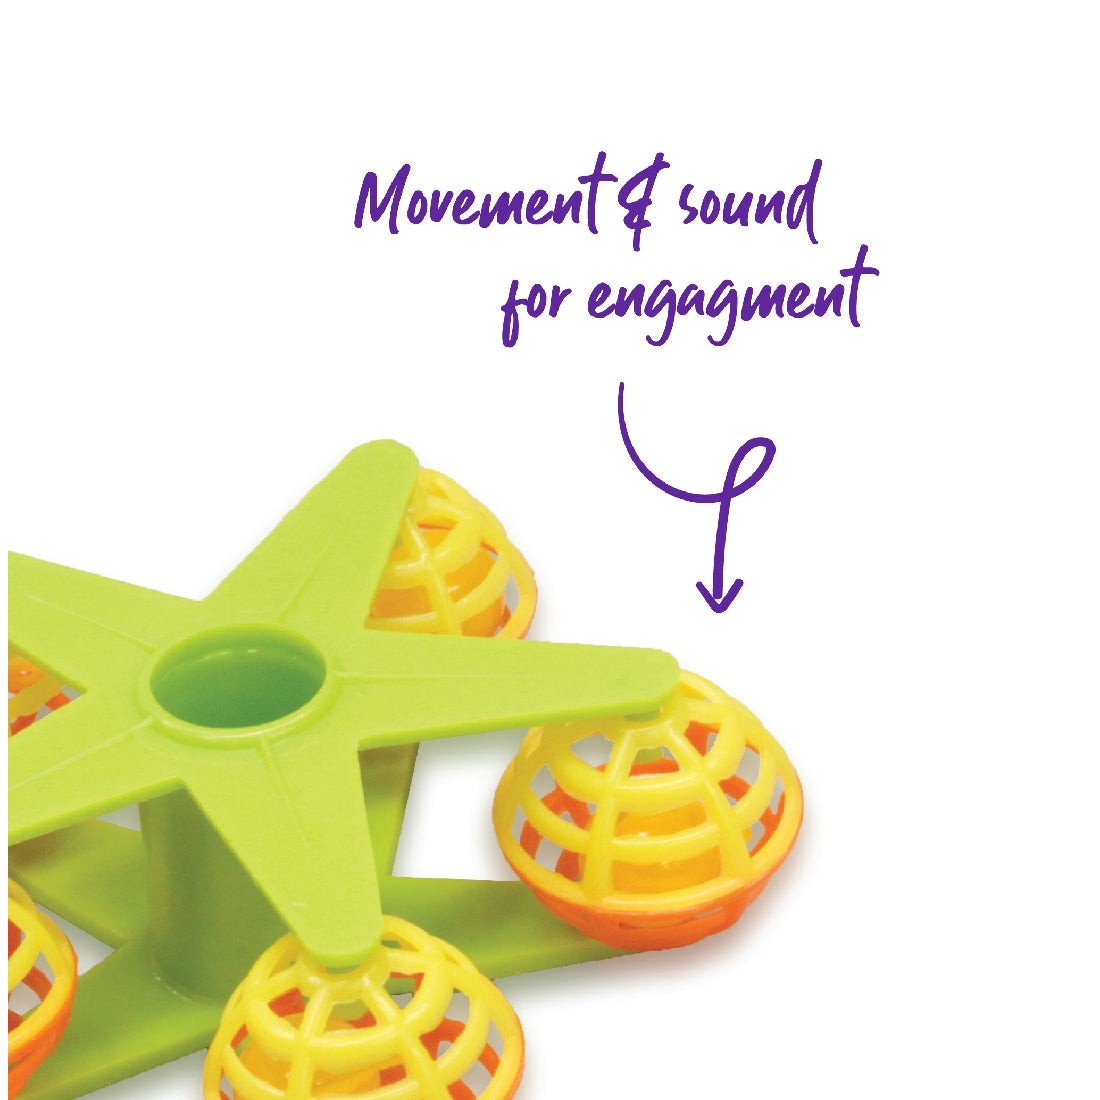 Green and yellow bird toy with text "Movement & sound for engagement."